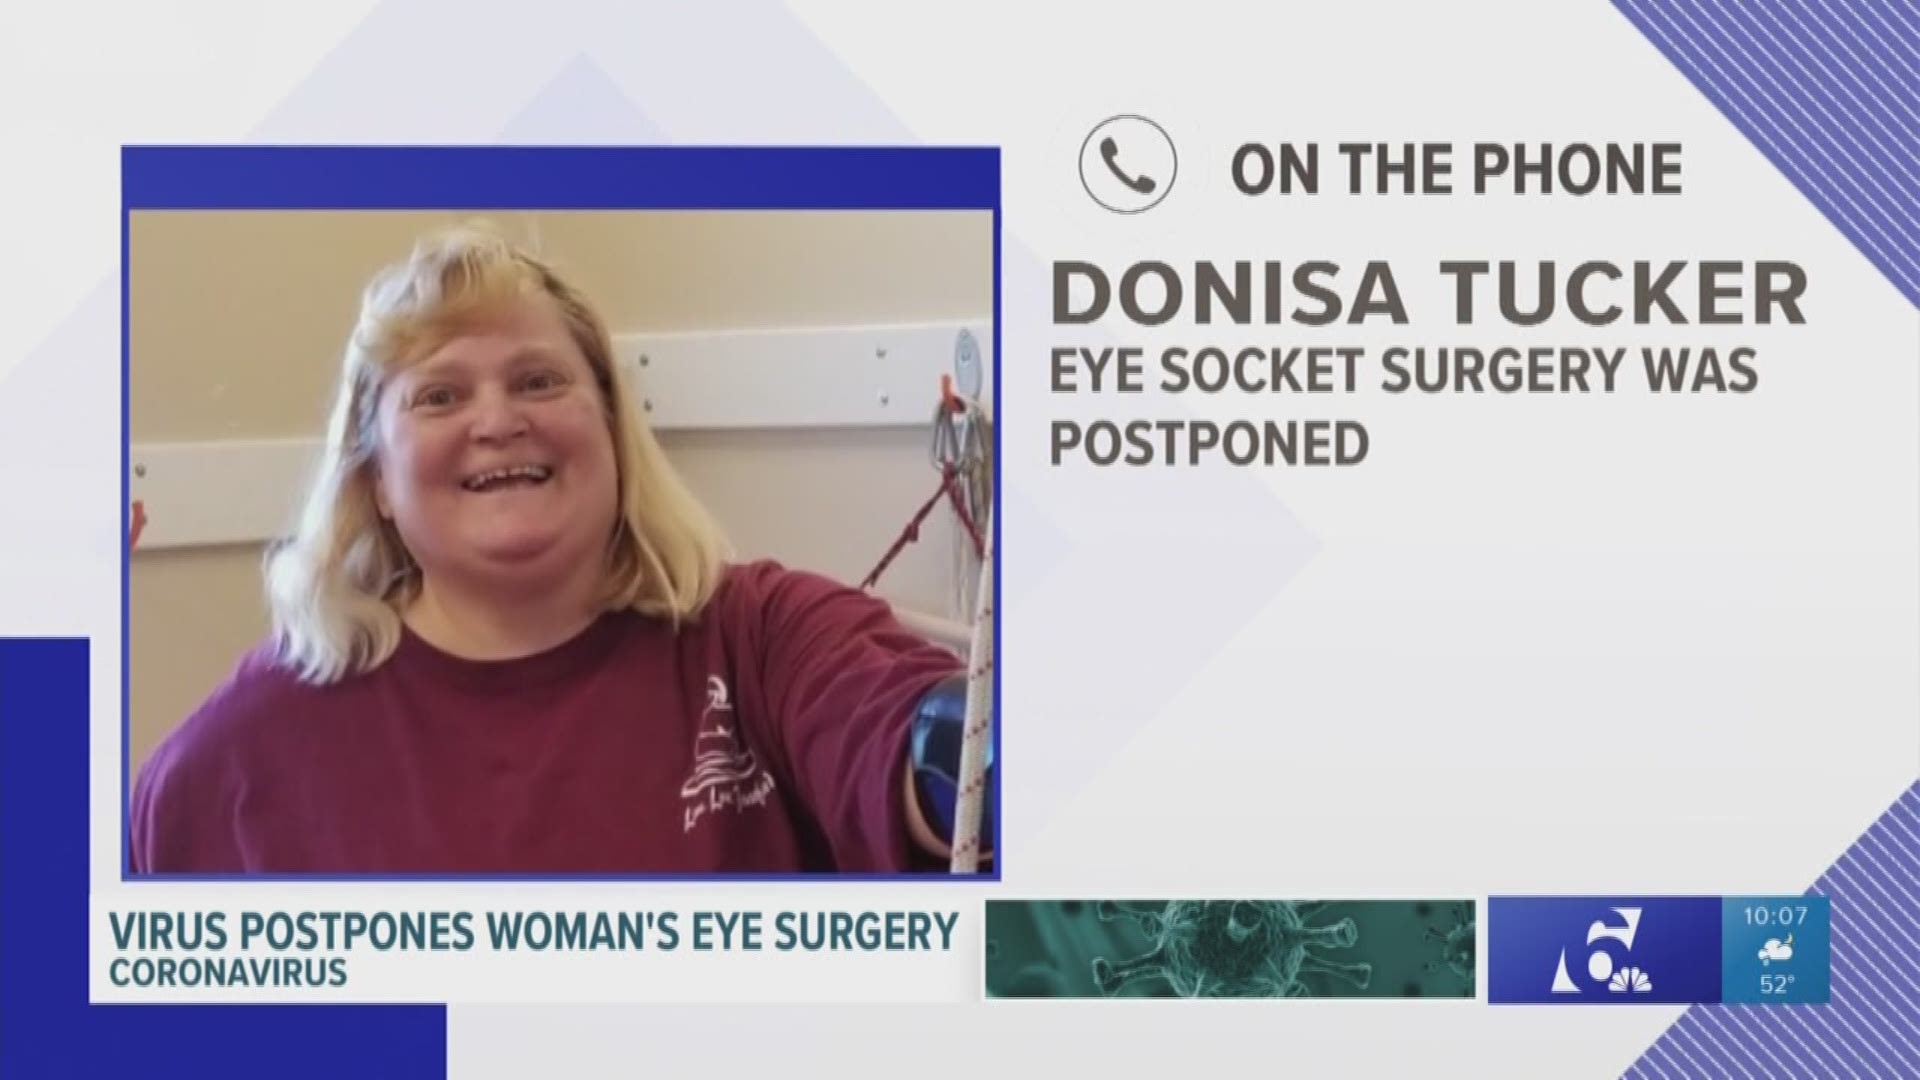 It was set for March 23, but now she'll have to wait more than a year to get the surgery.